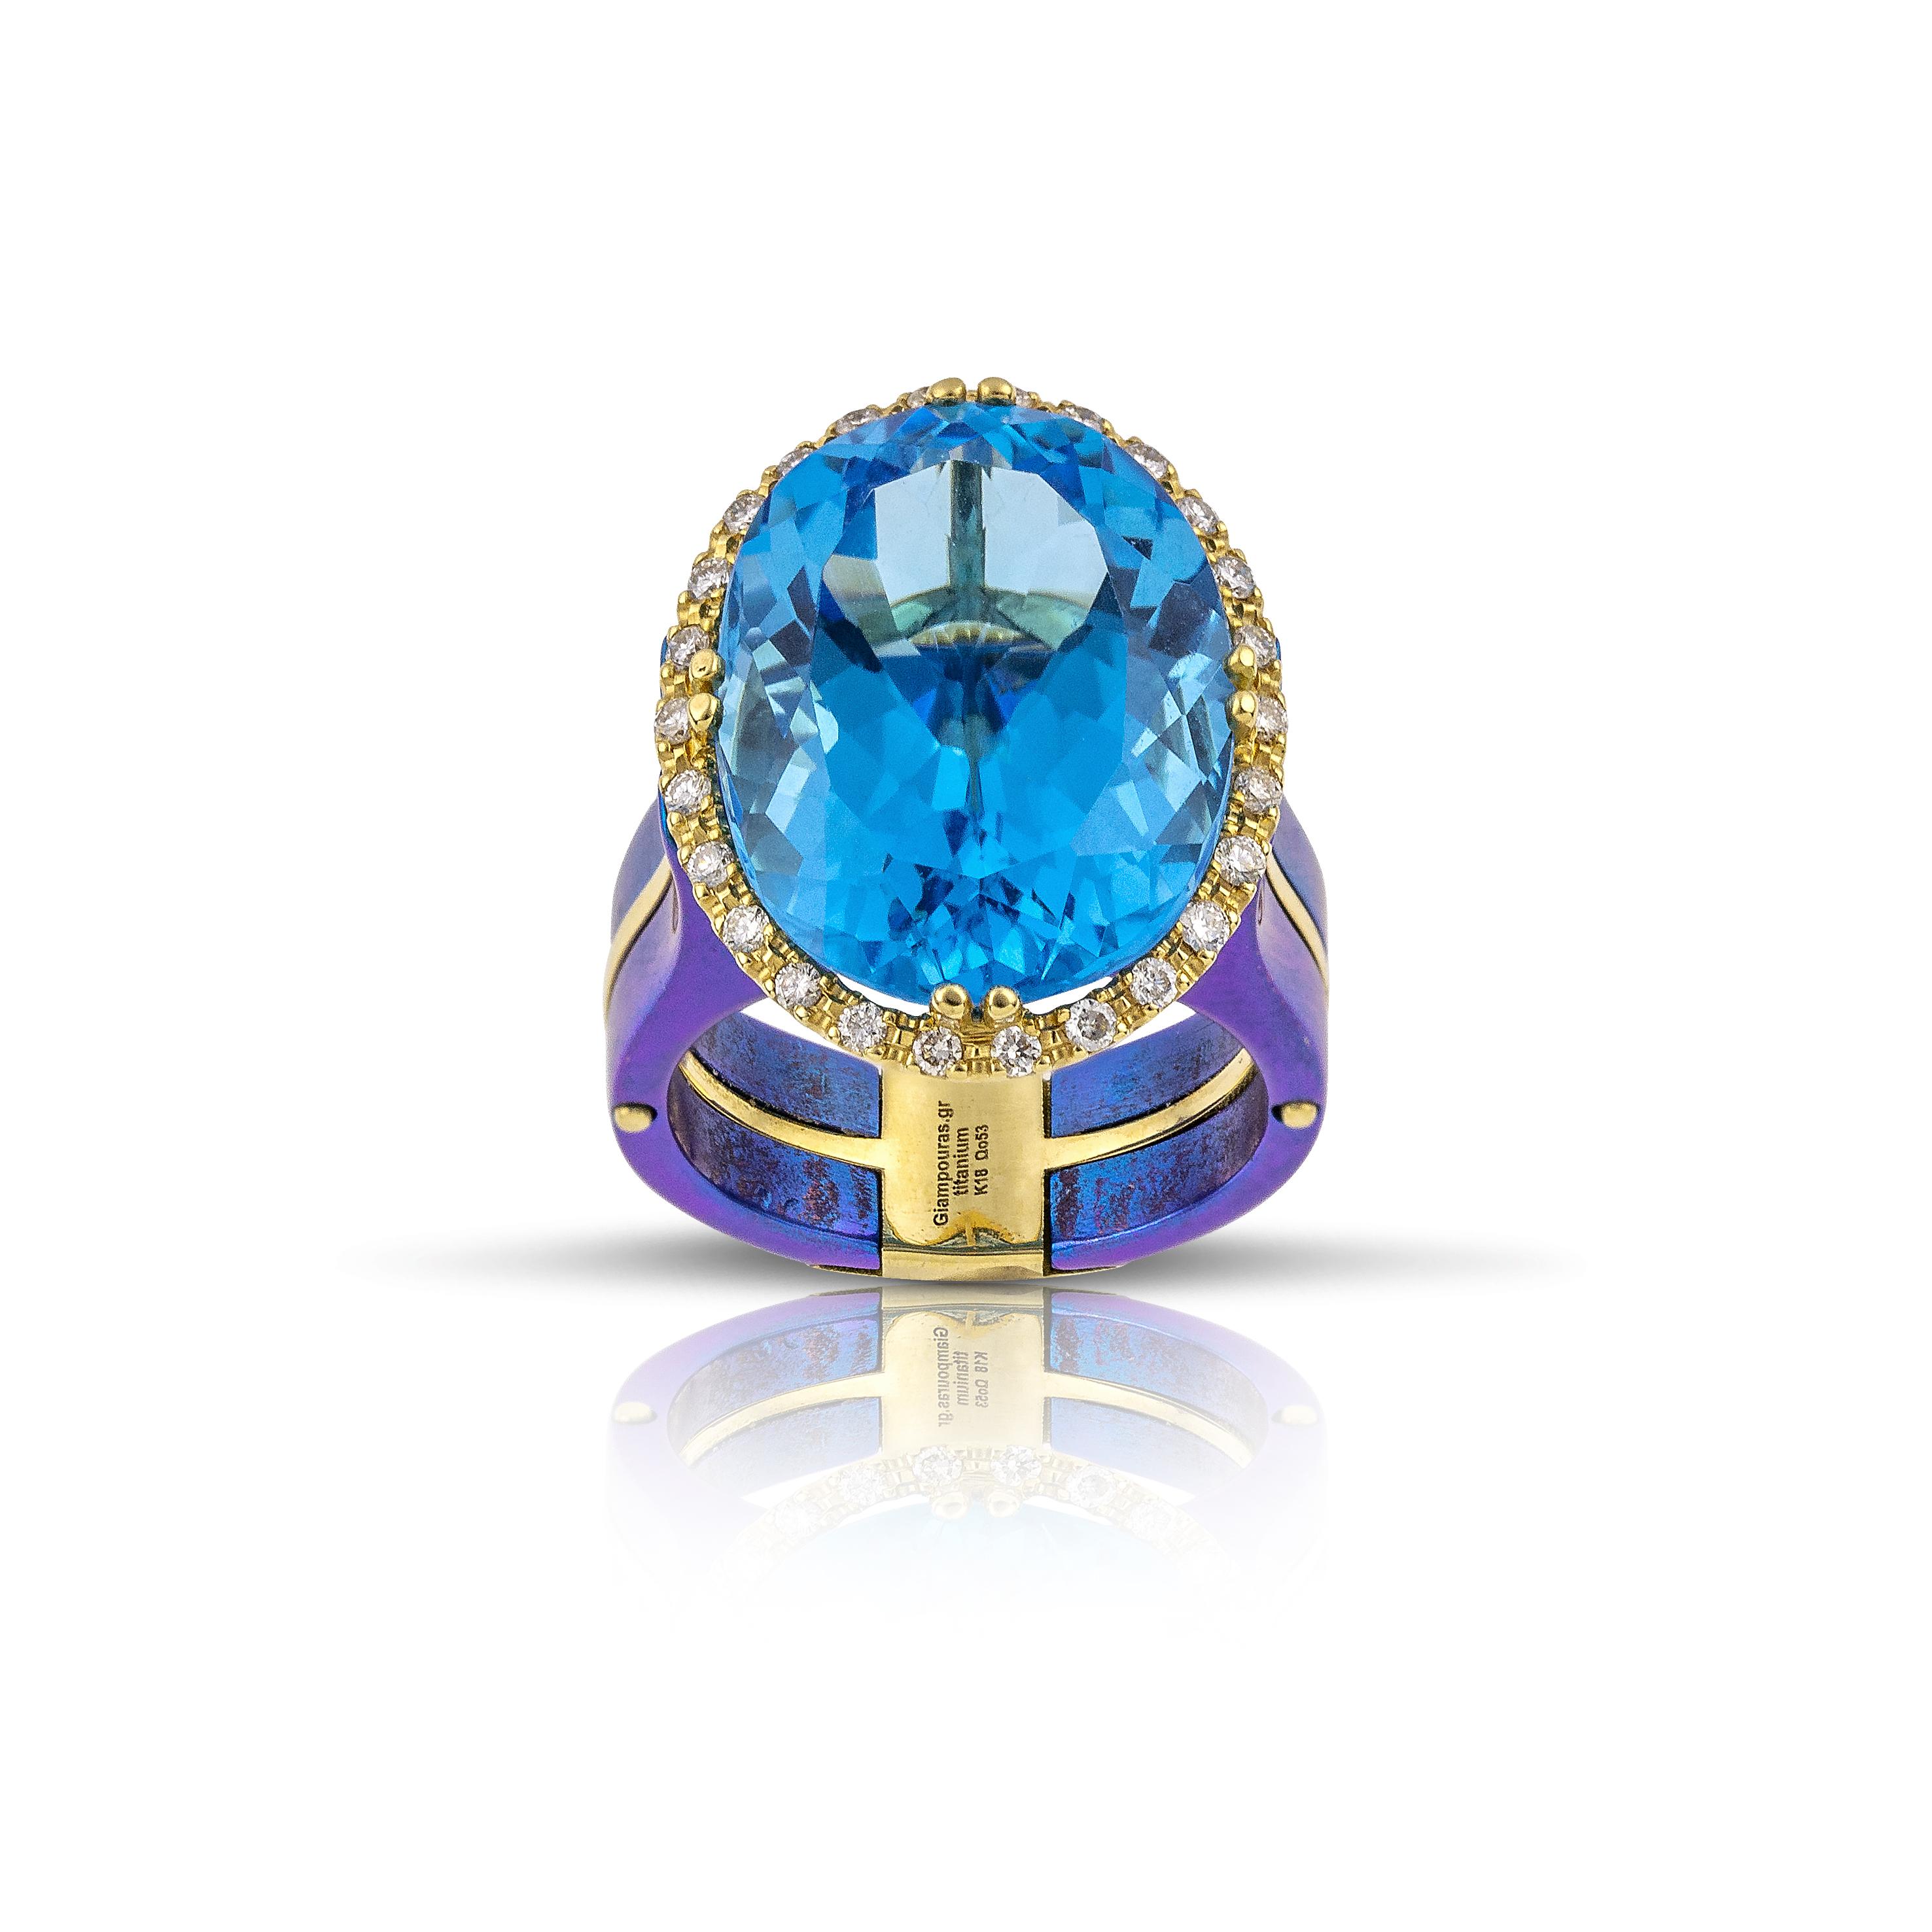 Blue Oval Topaz Ring by Vasilis Giampouras at Second Petale Gallery
Our Royal Elegance Titanium Blue Ring, where in its center lies a captivating oval-shaped blue topaz, exudes an enchanting azure hue that mesmerizes the senses. Encircled by a